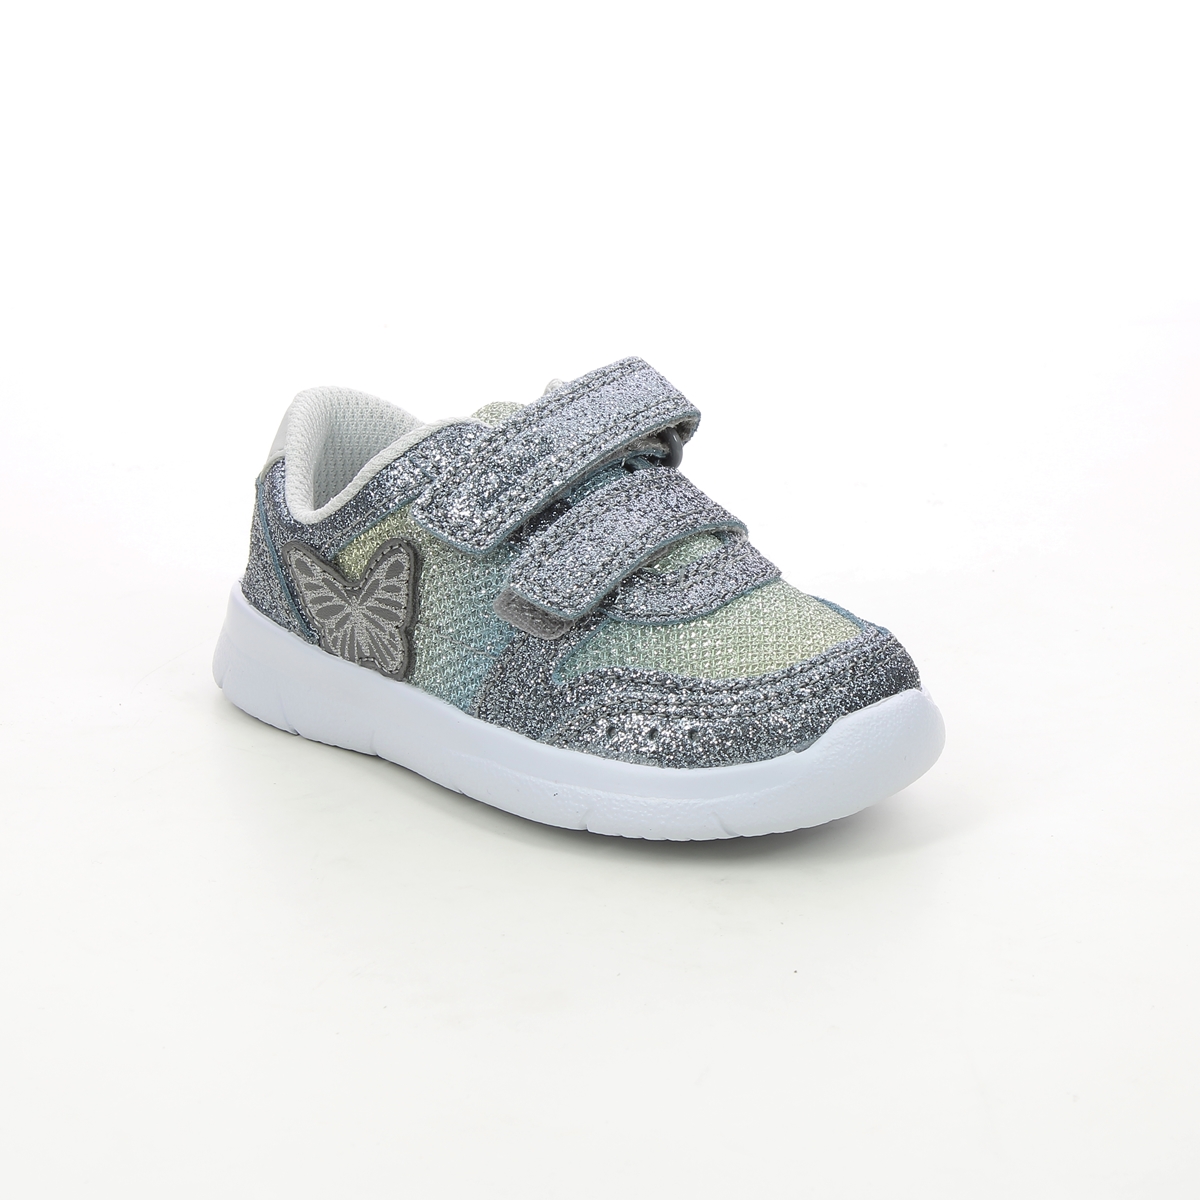 Clarks Ath Wing T F Fit Metallic toddler girls